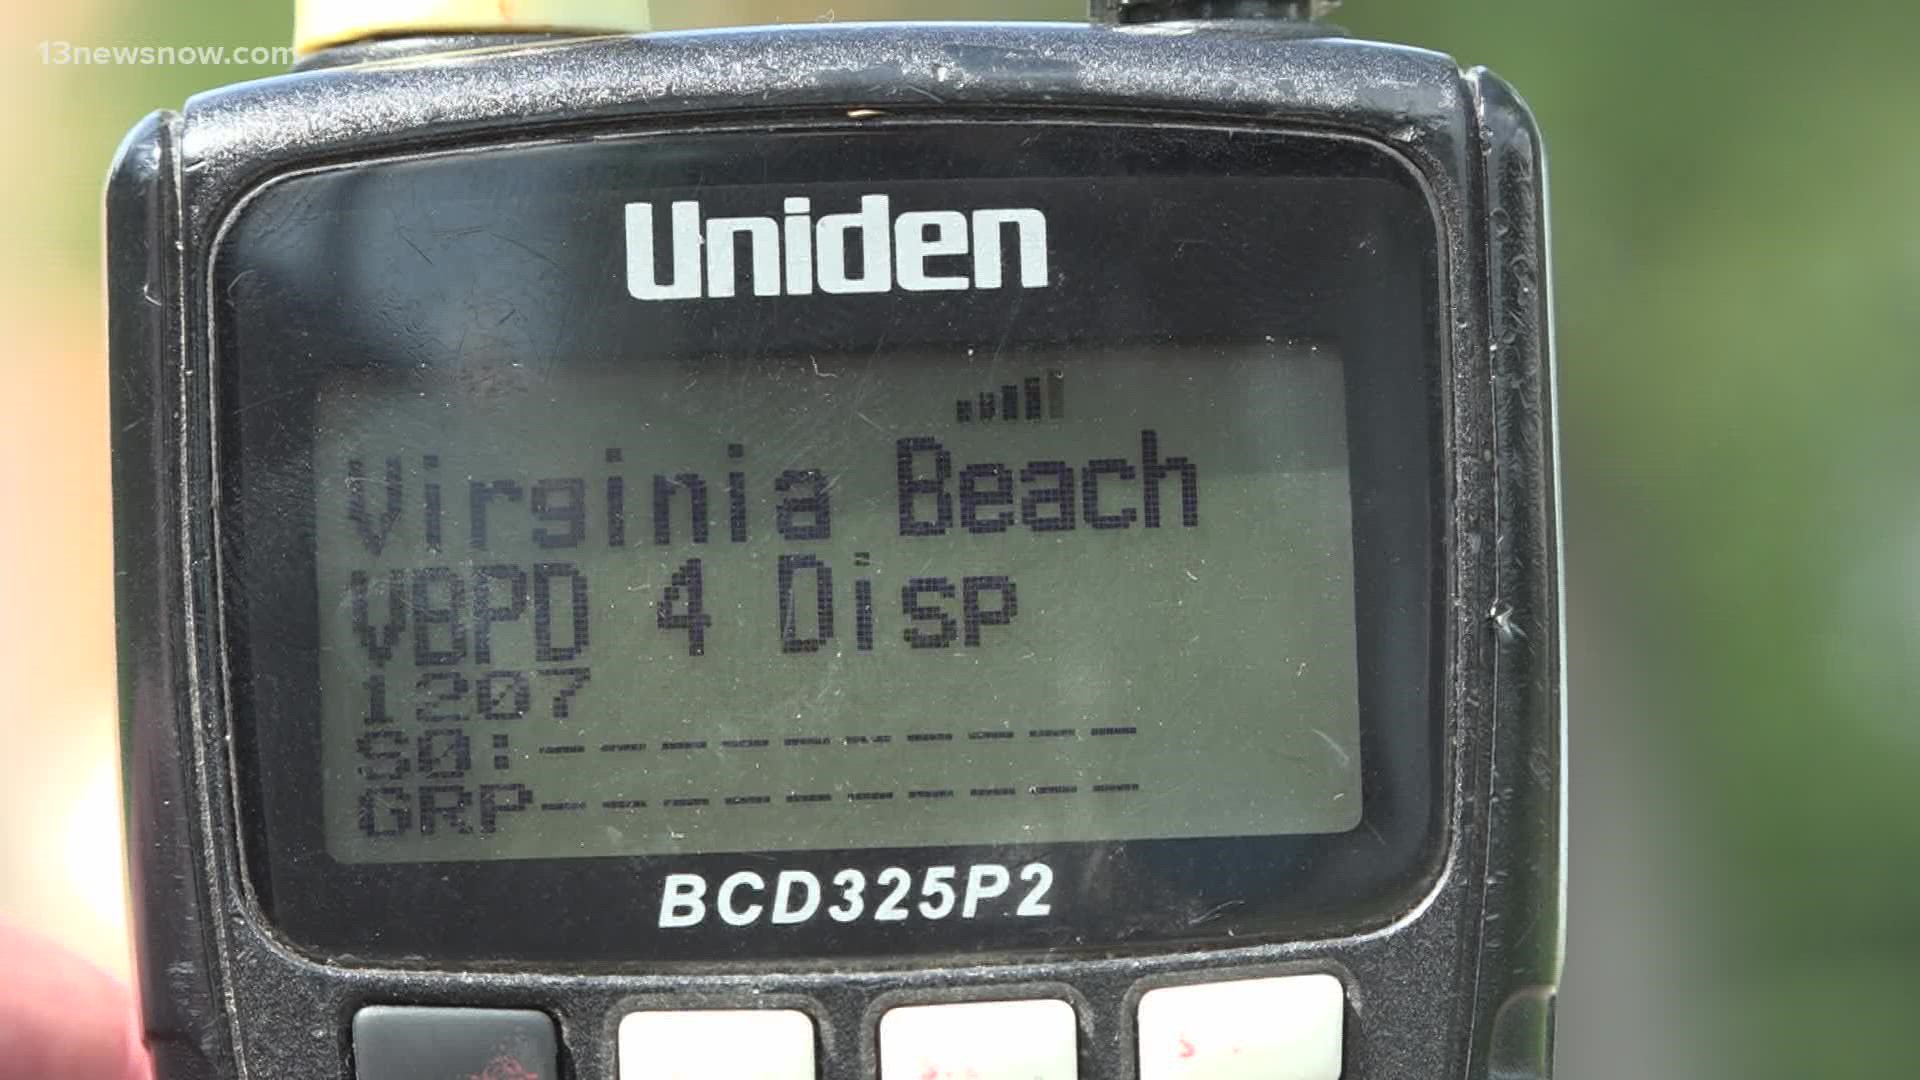 Virginia Beach police radio airwaves went dark on July 28. Scanners, websites and phone apps can no longer pick up the channel. It's meant to protect officers.